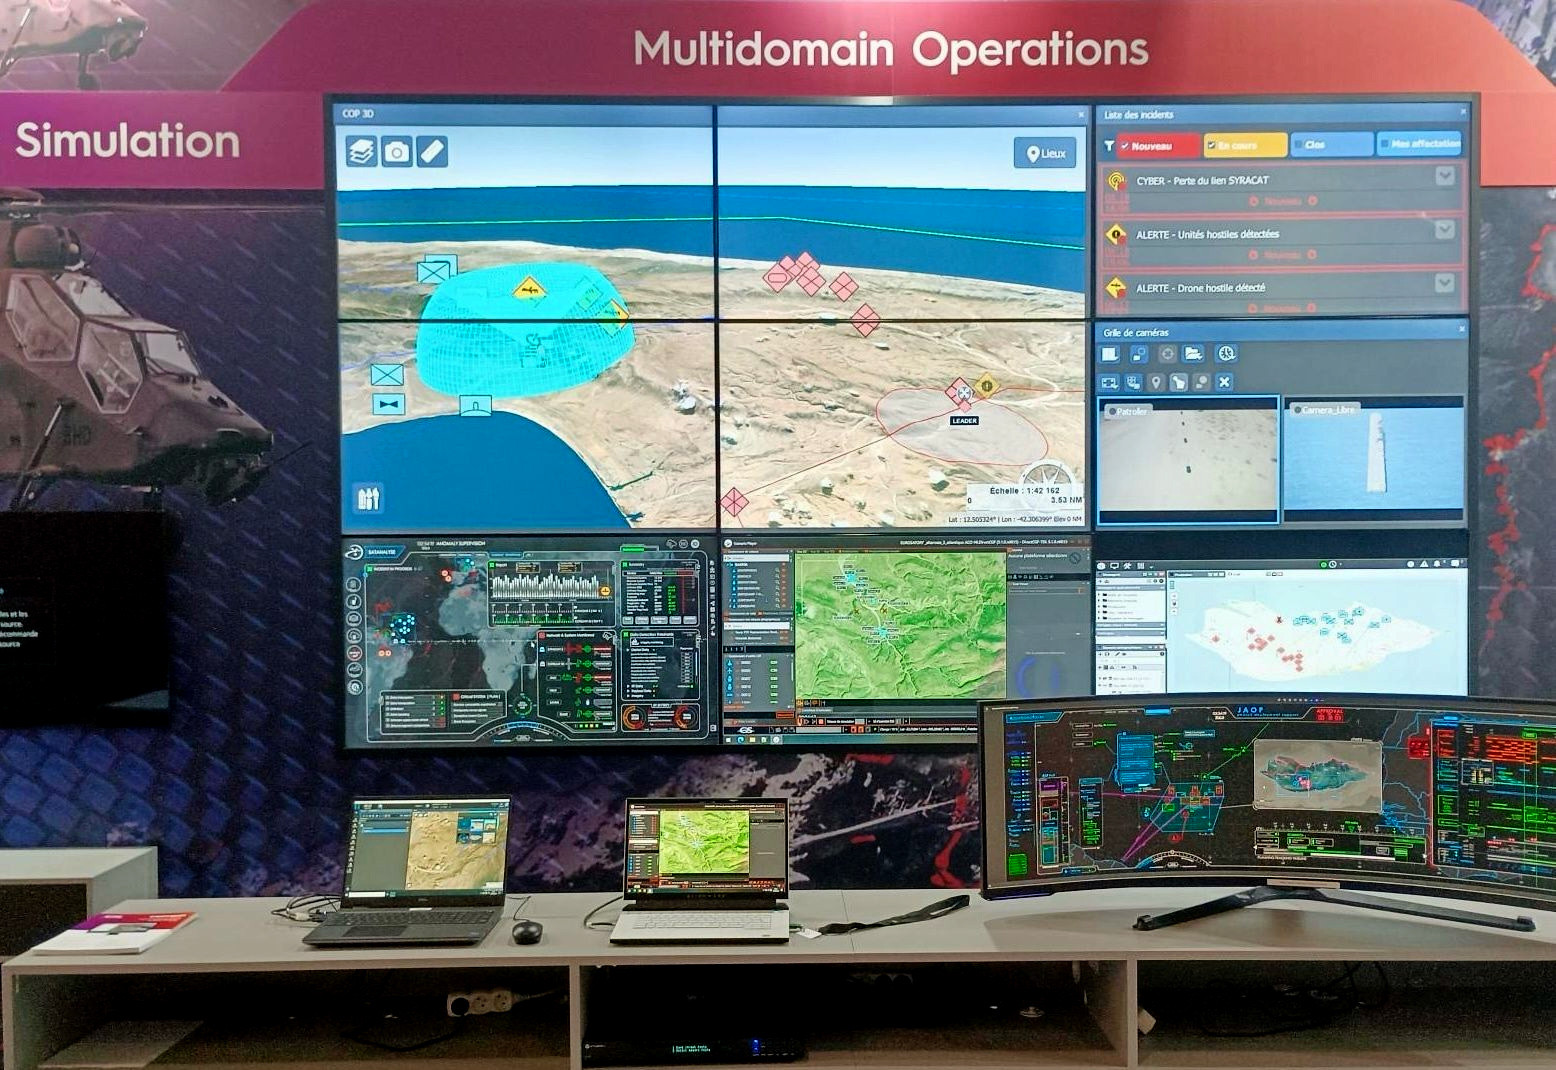 See how Crimson is used to protect critical infrastructures and public spaces at Eurosatory